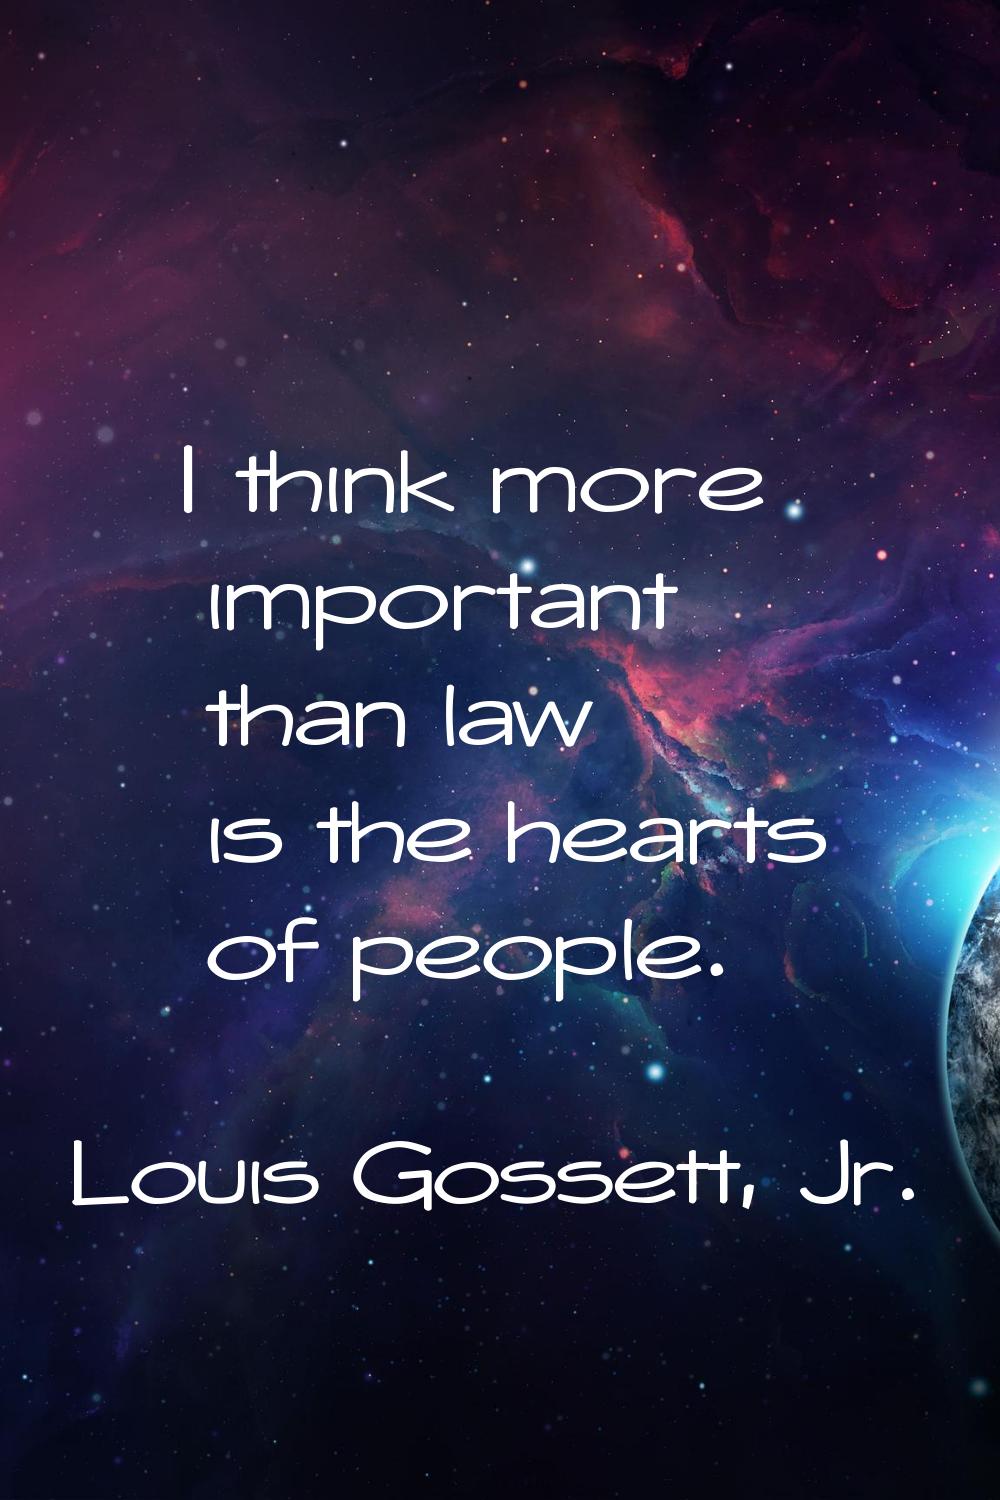 I think more important than law is the hearts of people.